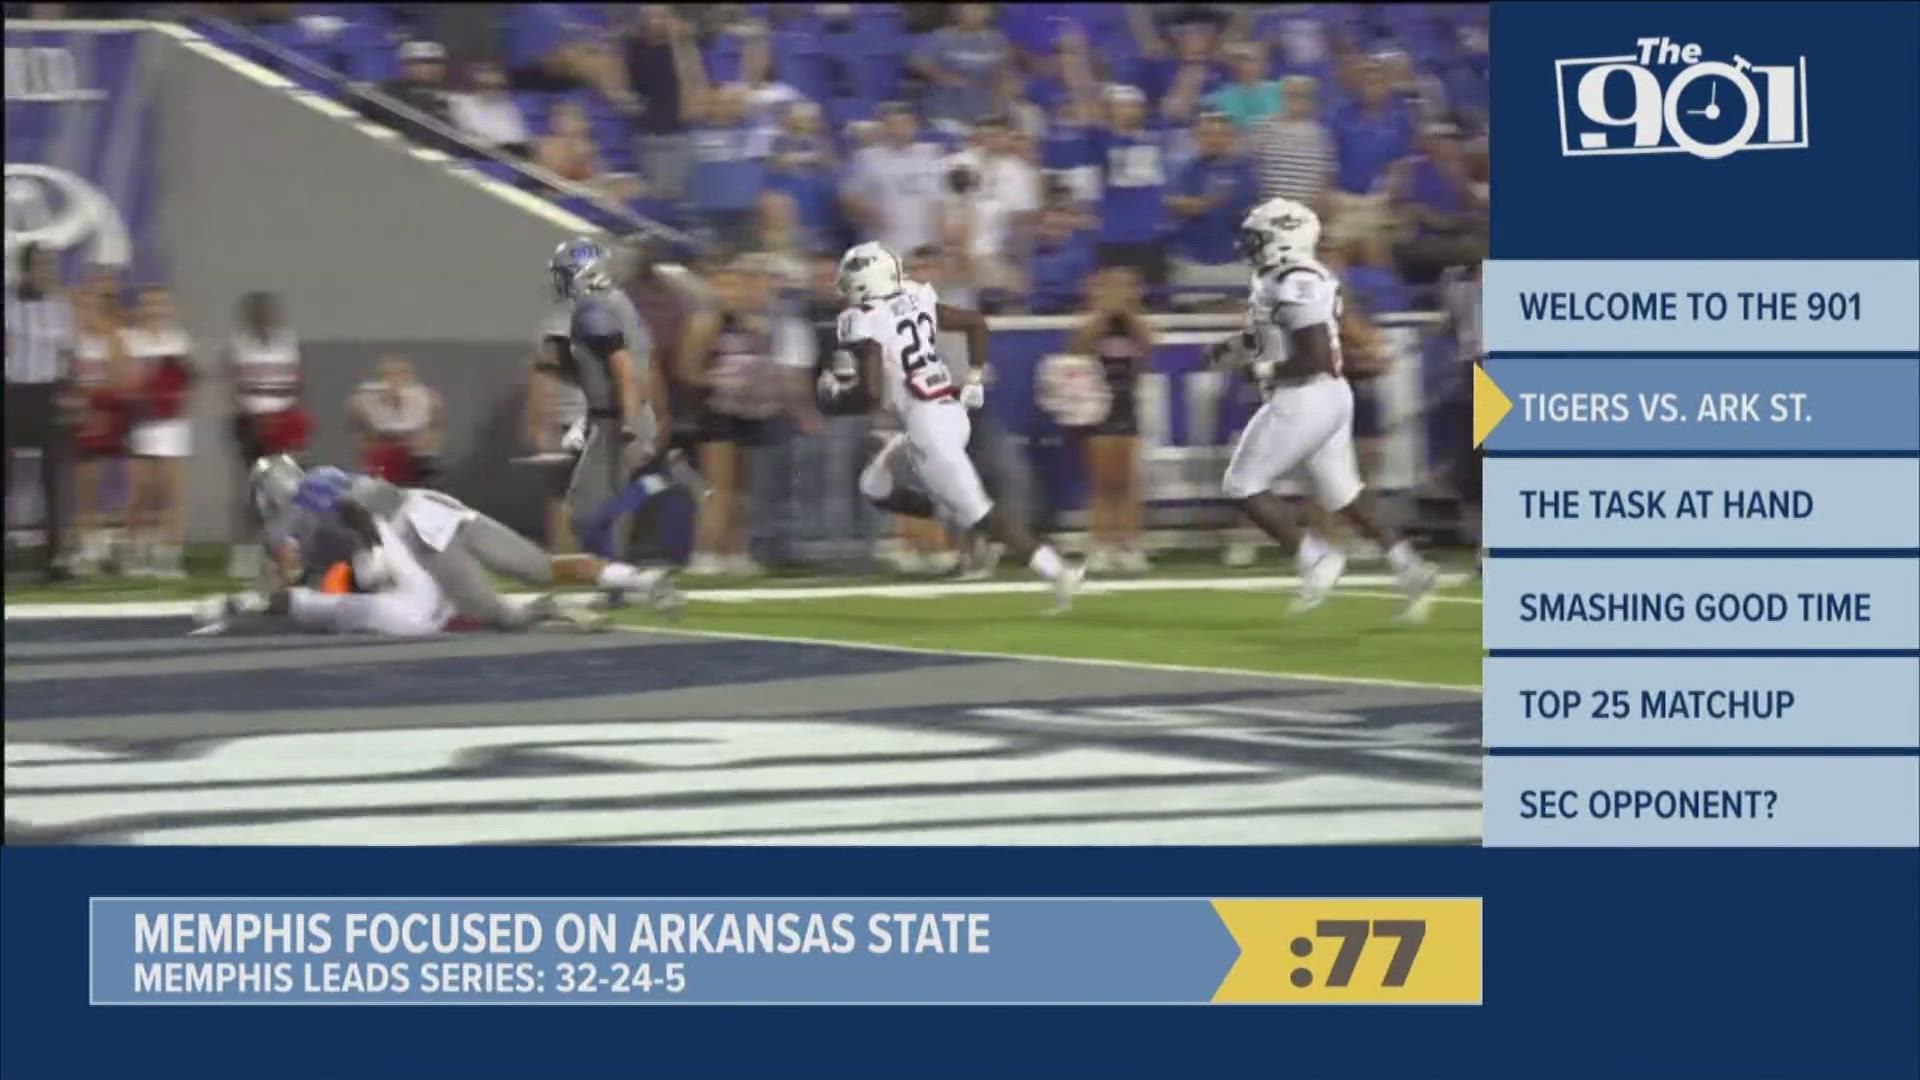 Avery Braxton breaks down the Tigers' big matchup against Arkansas State in The 901.